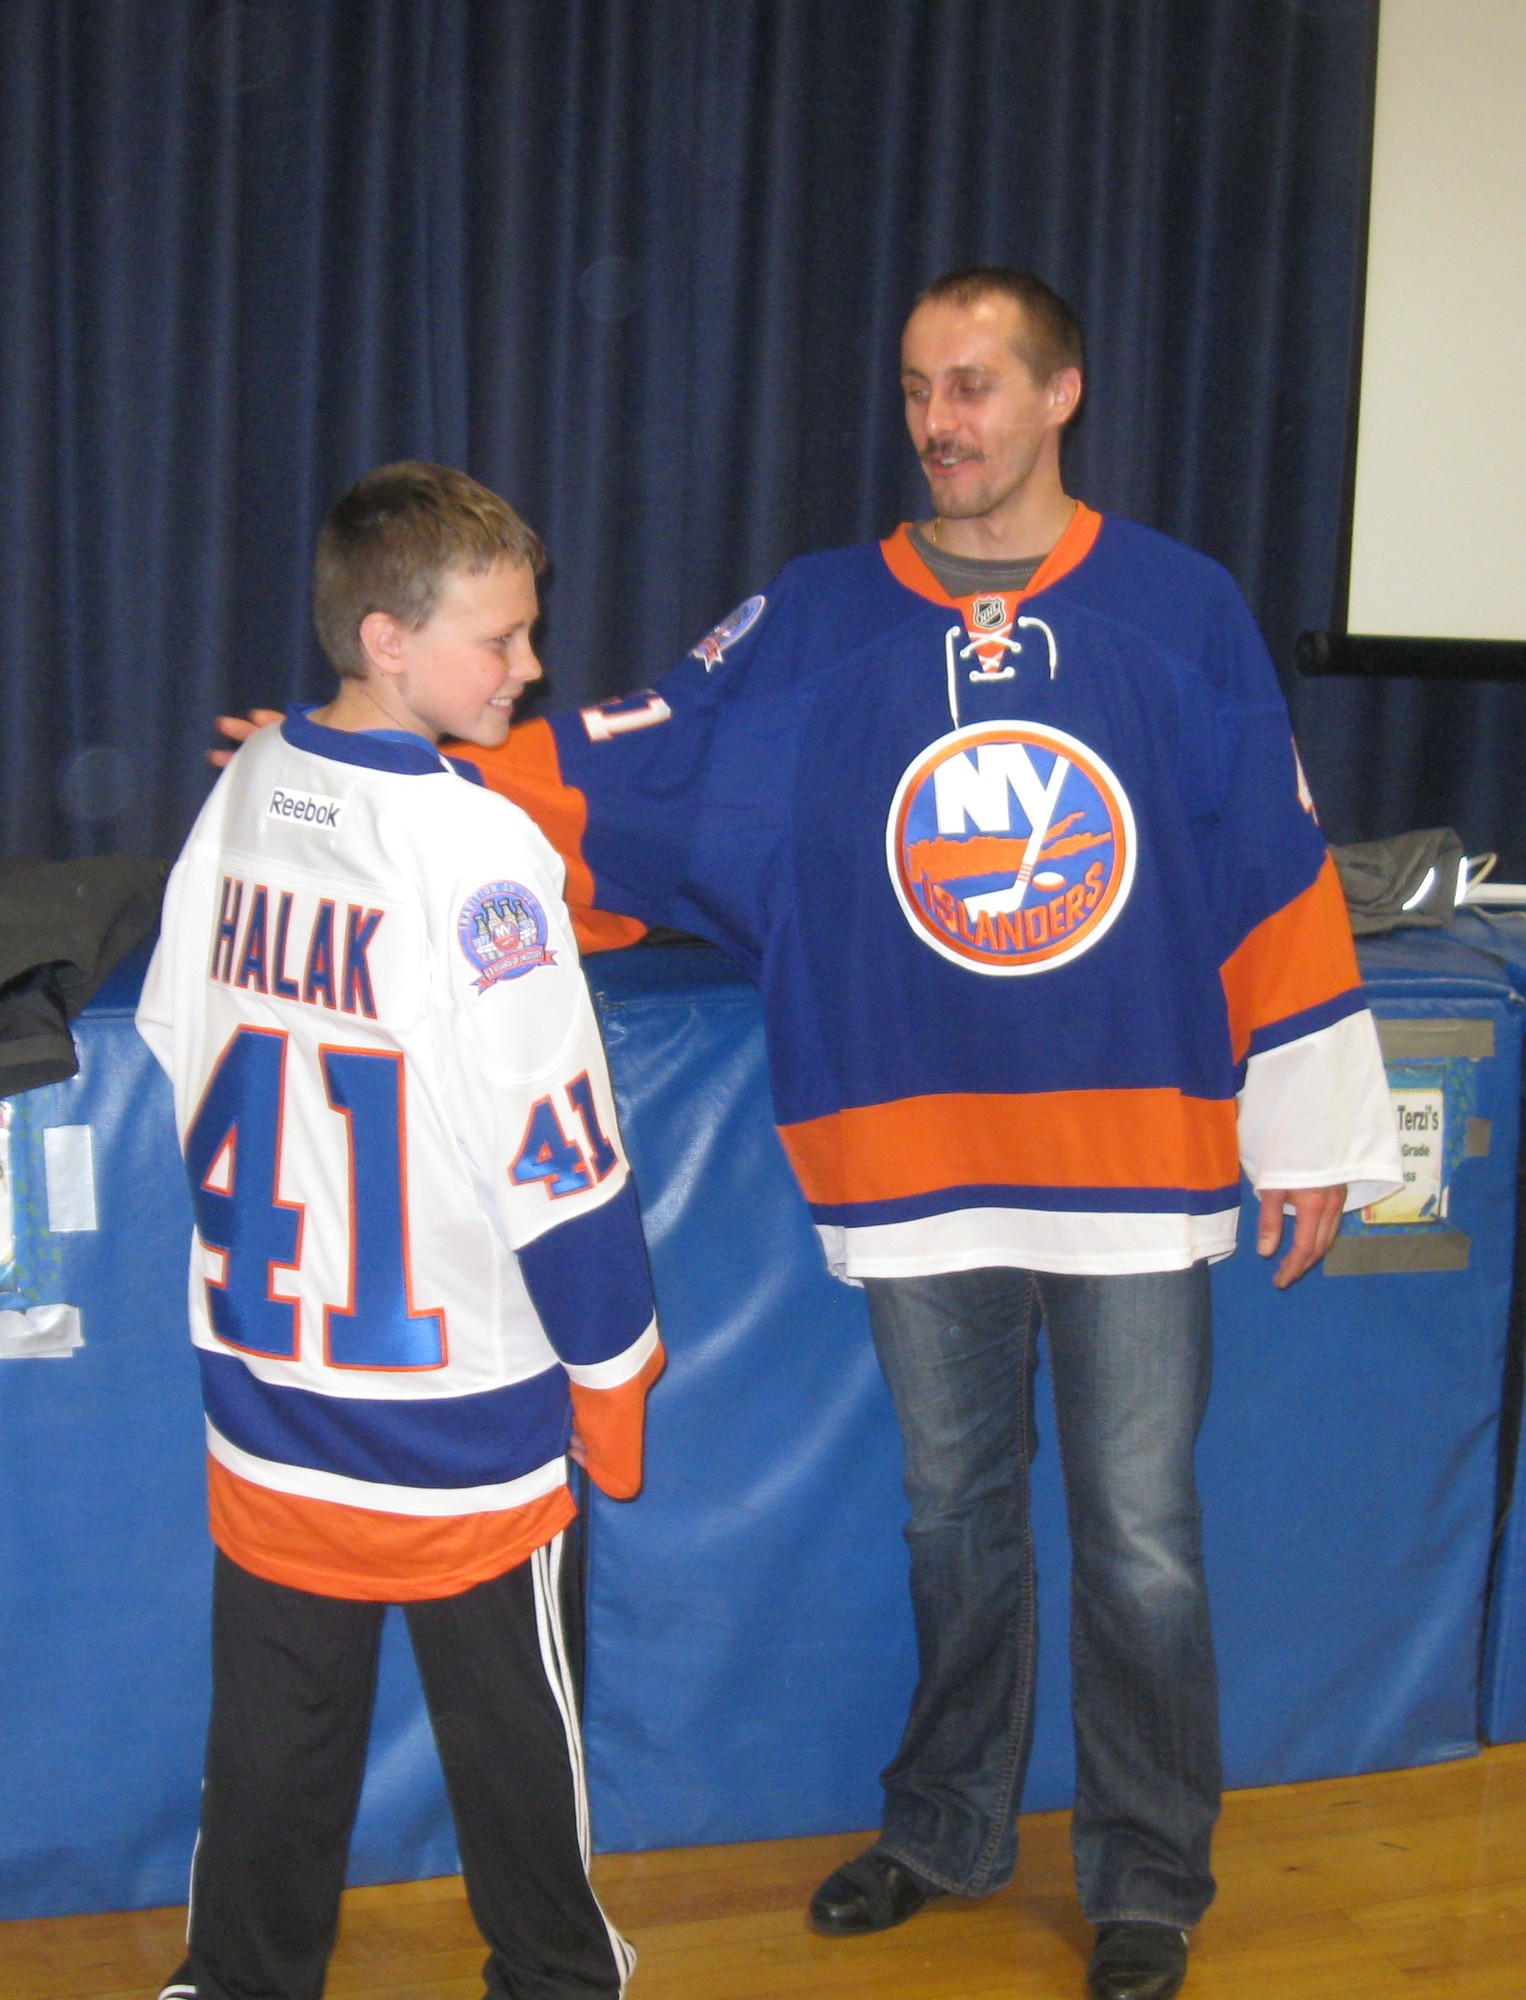 A West End Elementary student showed off his Jaroslav Halak jersey to the man himself.